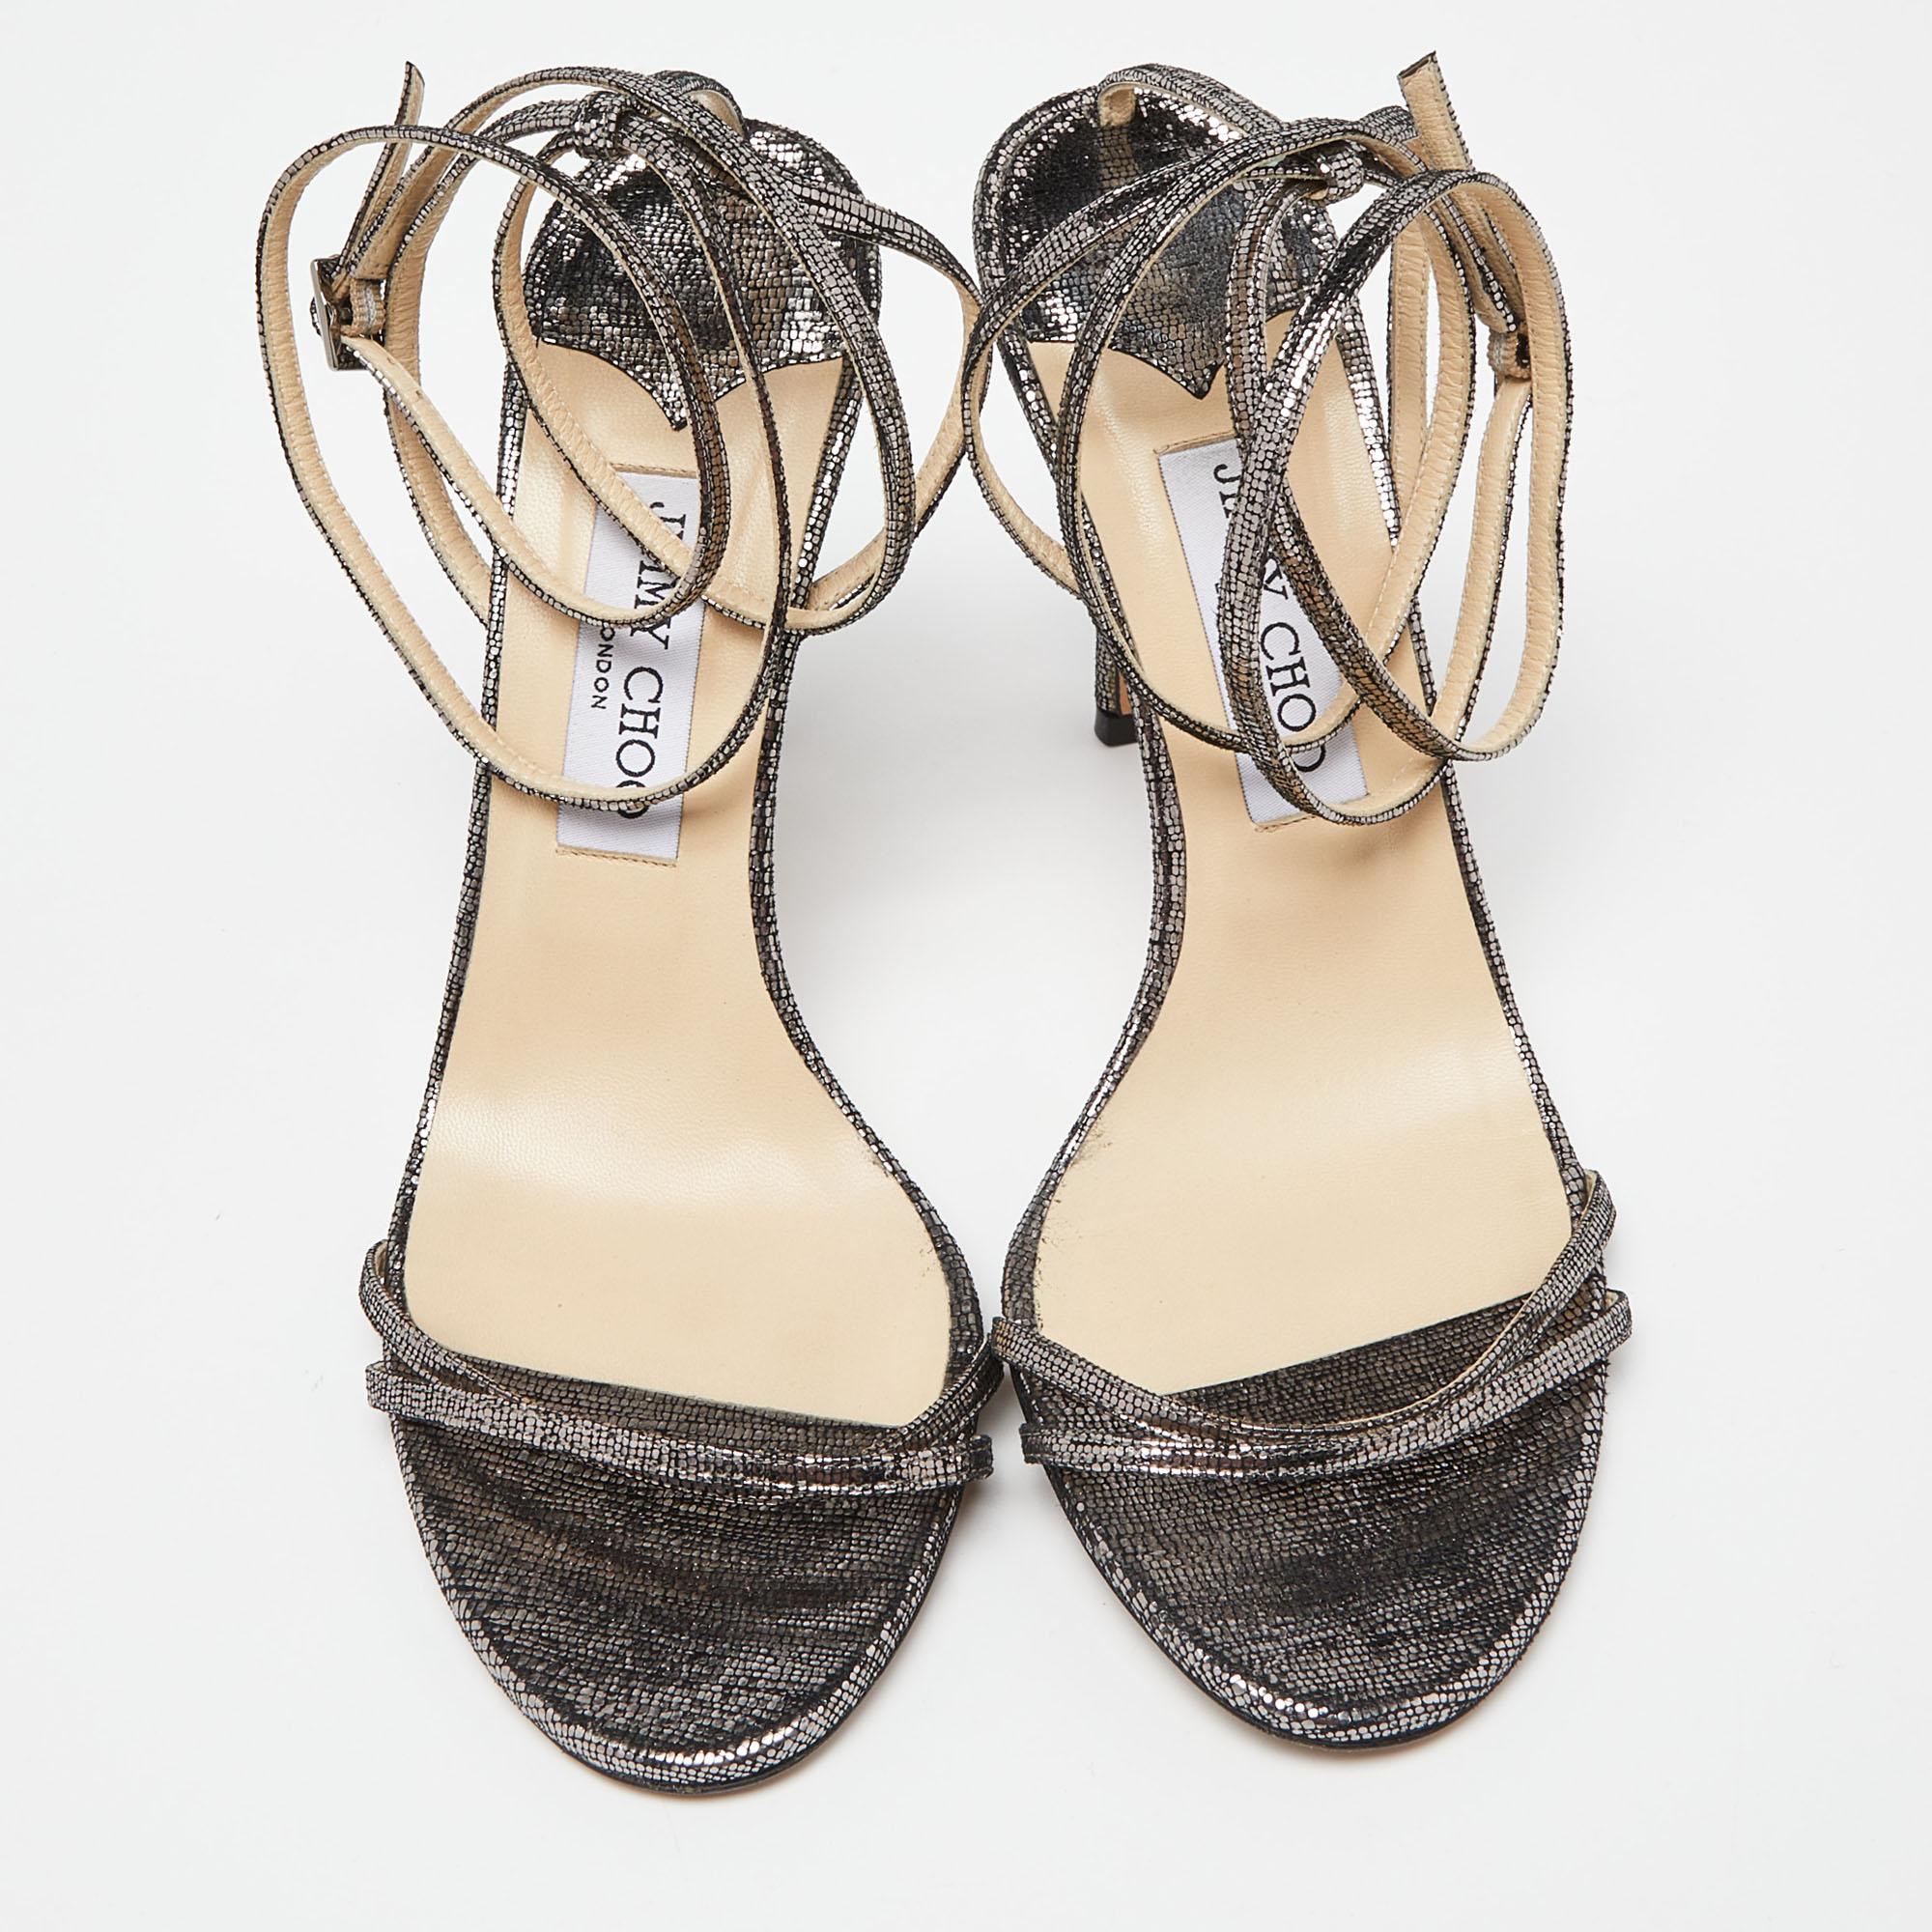 Jimmy Choo Metallic Suede Strappy Slingback Sandals Size 40.5